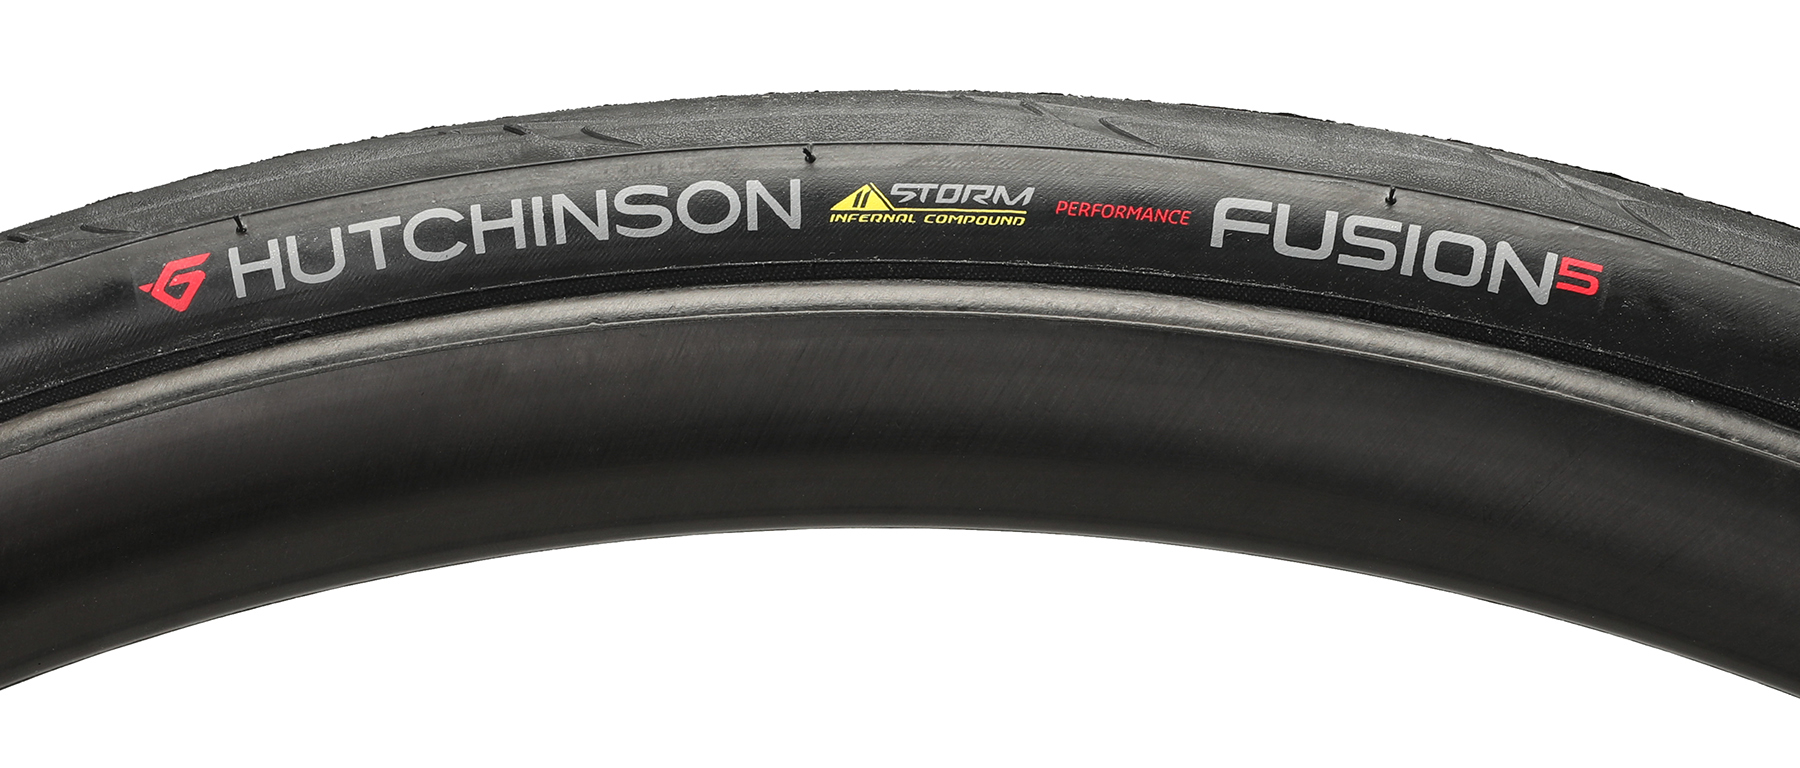 Hutchinson Fusion 5 Performance Tire OE 2-pack